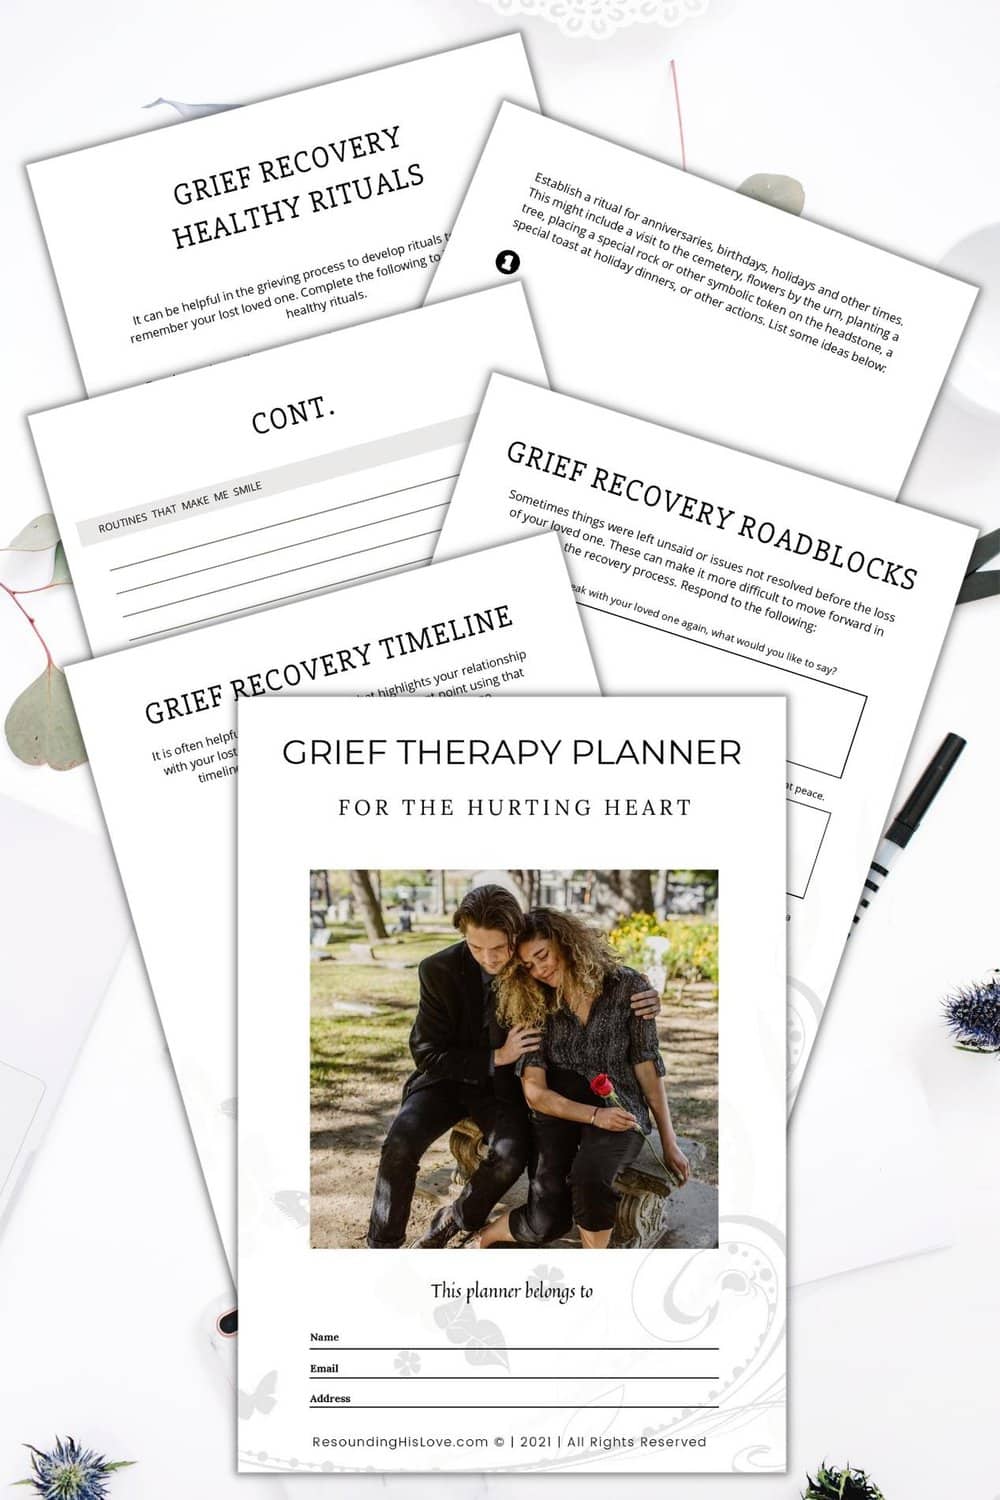 Grief Therapy for the Hurting Heart Planner